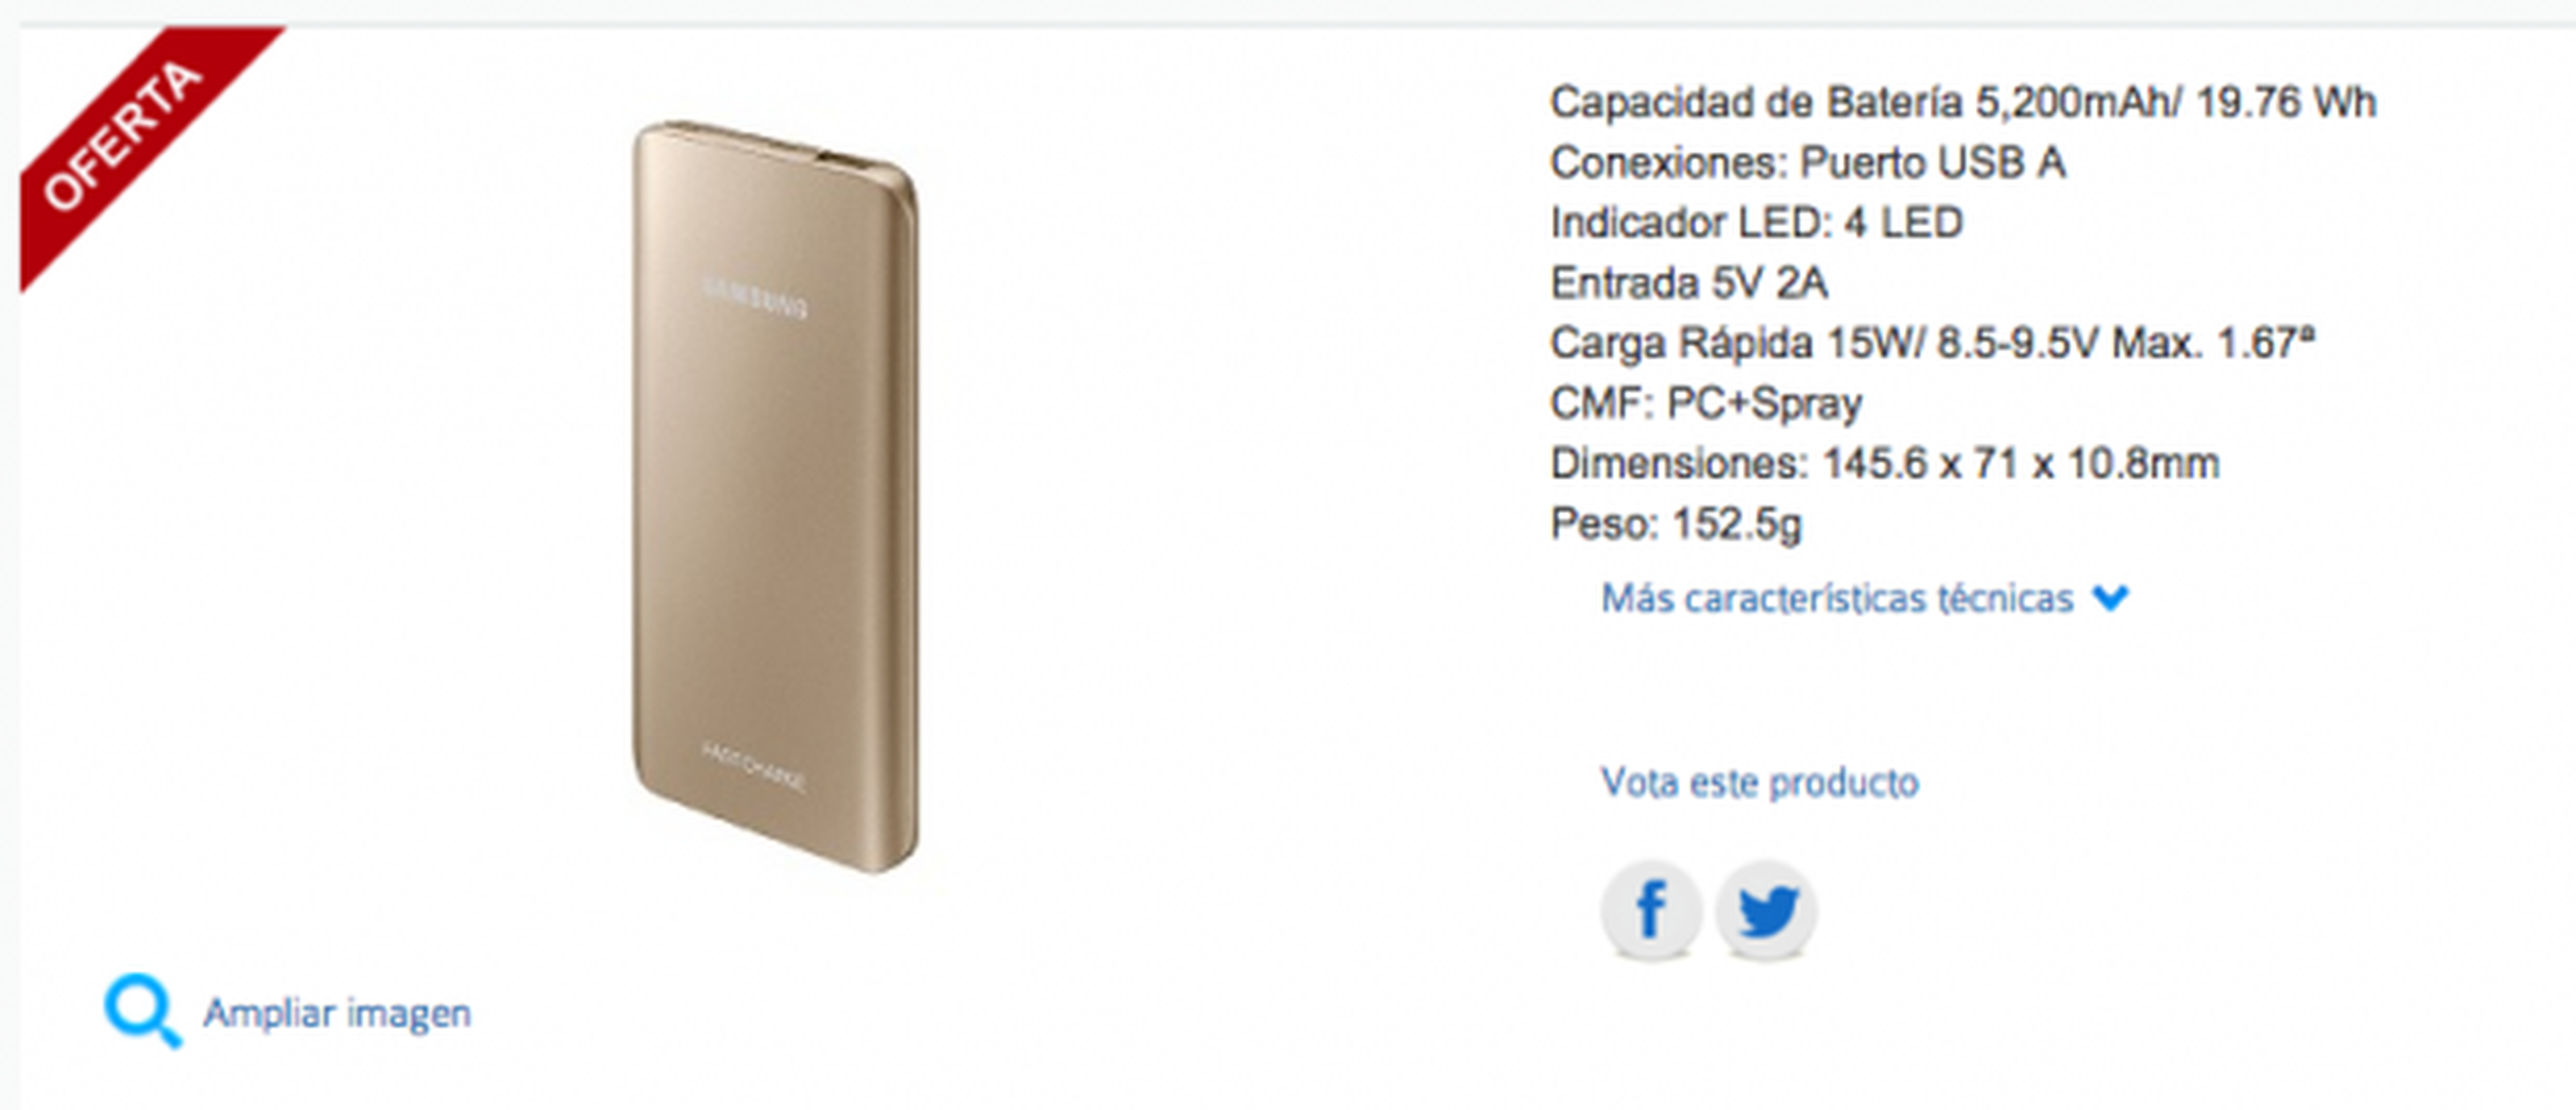 Cyber Monday 2015 Carrefour